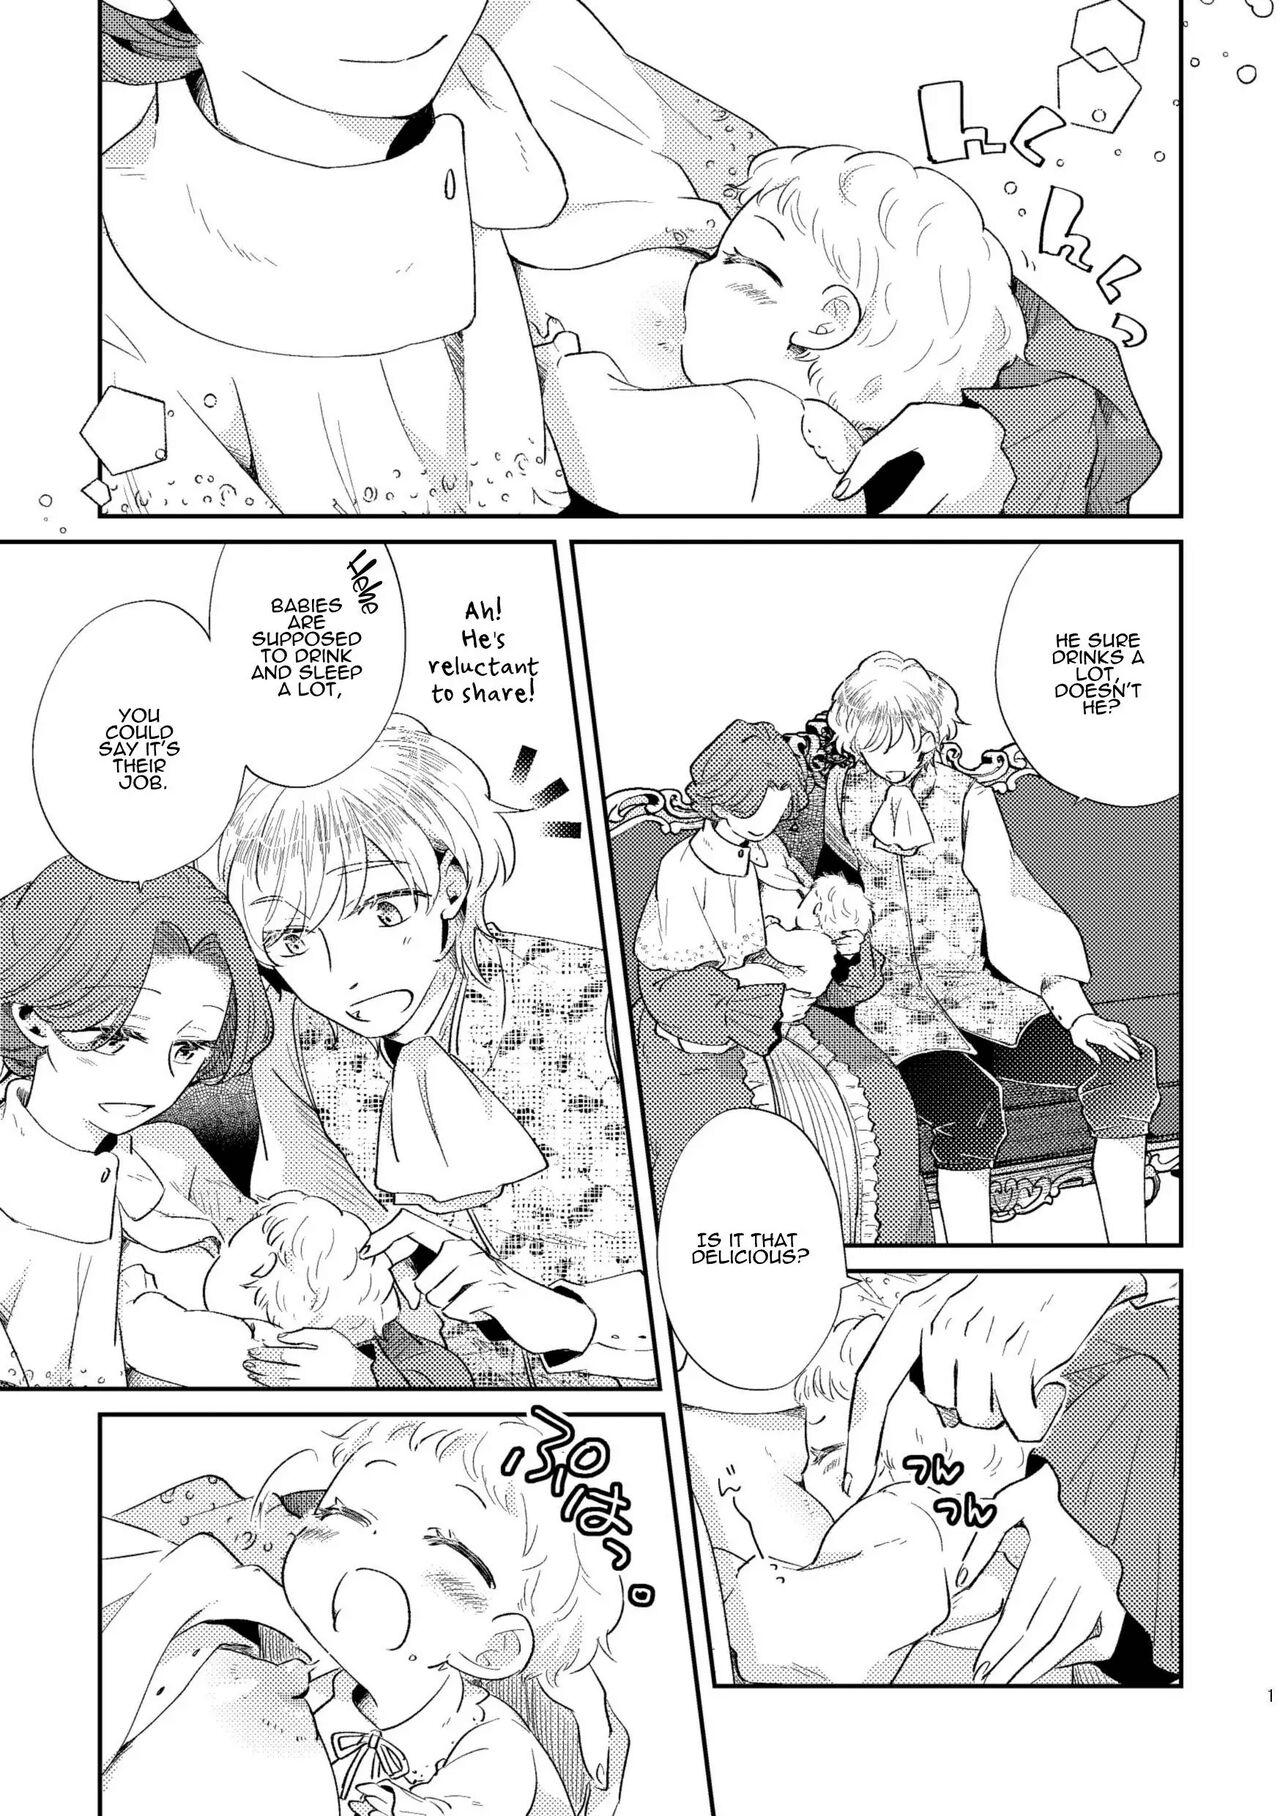 Leche Shounen Ou to Toshiue Ouhi EverAfter | The Boy King and His Older Queen EverAfter Wives - Page 3